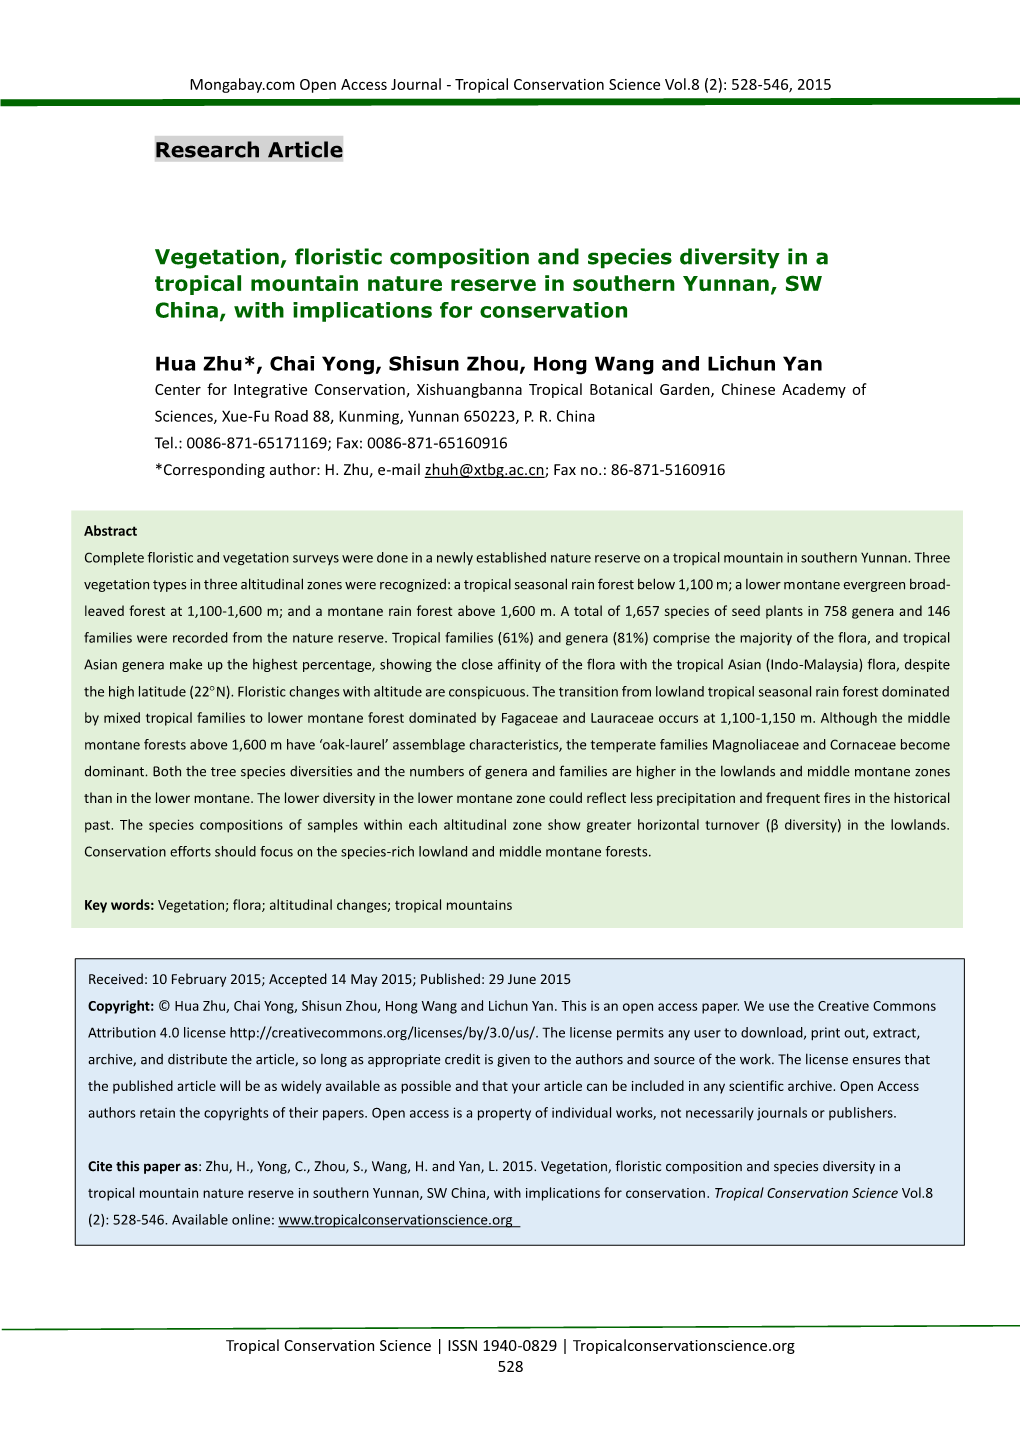 Vegetation, Floristic Composition and Species Diversity in a Tropical Mountain Nature Reserve in Southern Yunnan, SW China, with Implications for Conservation